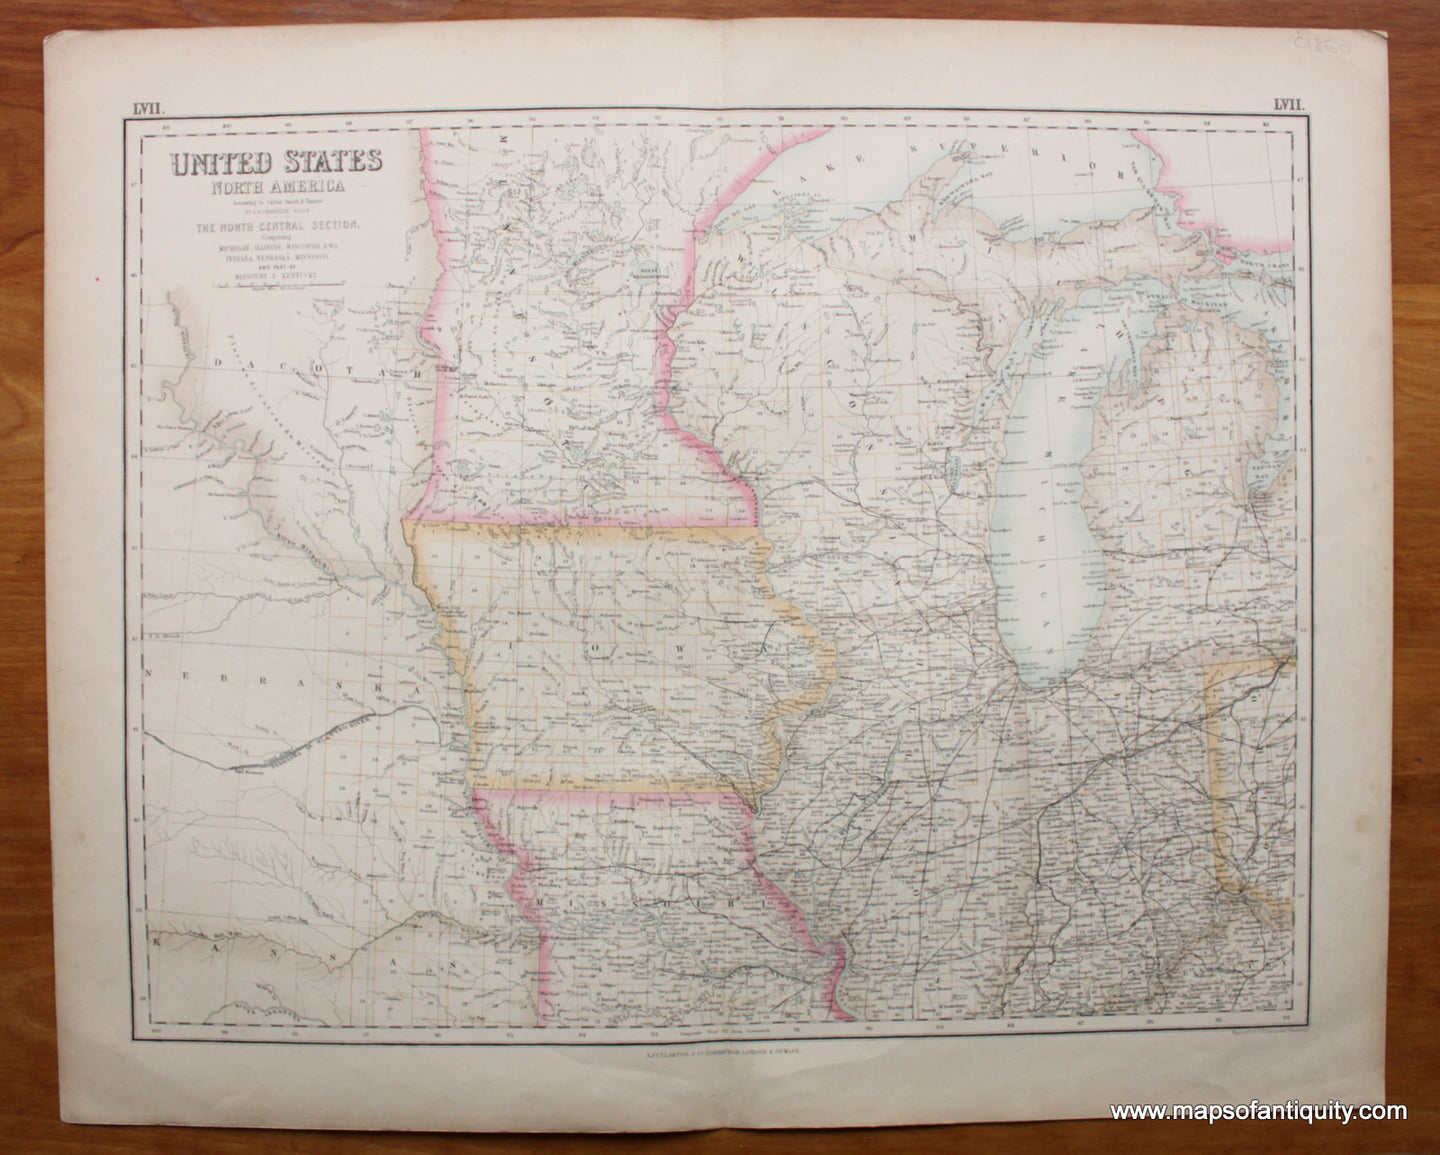 Antique-Hand-Colored-Map-United-States-North-America:-The-North-Central-Section--Comprising-Michigan-Illinois-Wisconsin-Iowa-Indiana-Nebraska-Minnisota-and-part-of-Missouri-&-Kentucky.-**********-United-States-Midwest-c.-1860-Fullarton-Maps-Of-Antiquity